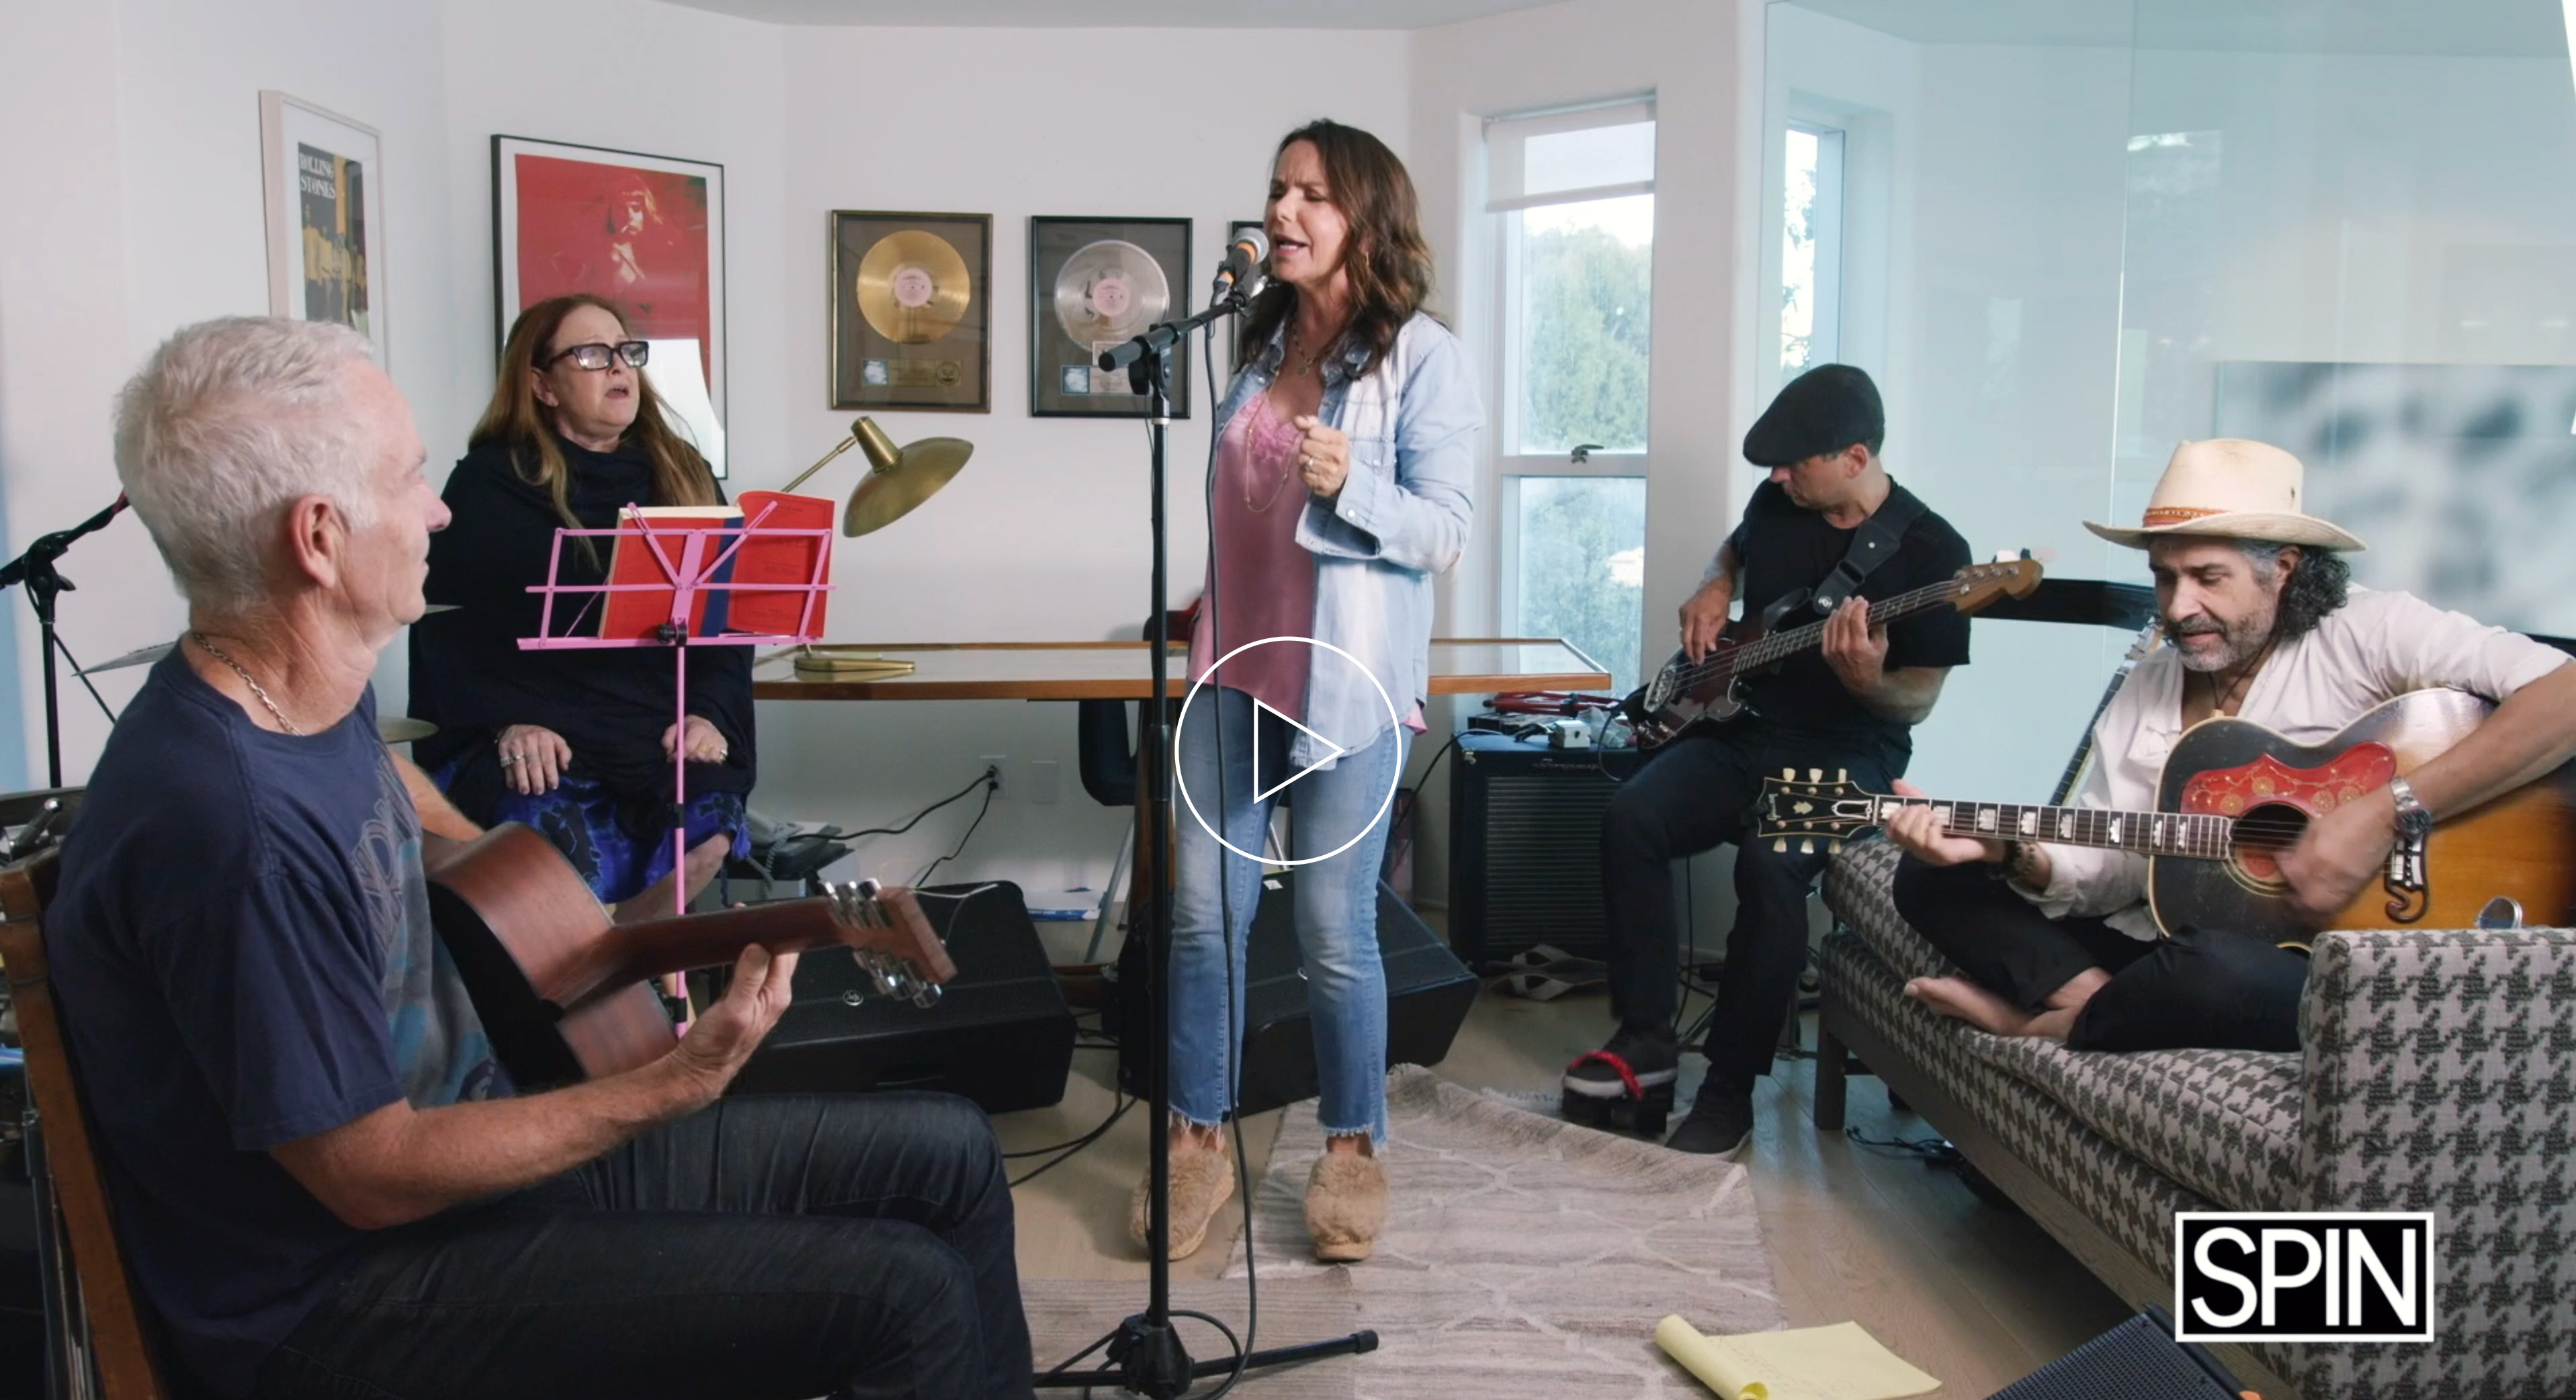 Patty Smyth Talks Doing the Theme Song for a Show She's Never Watched